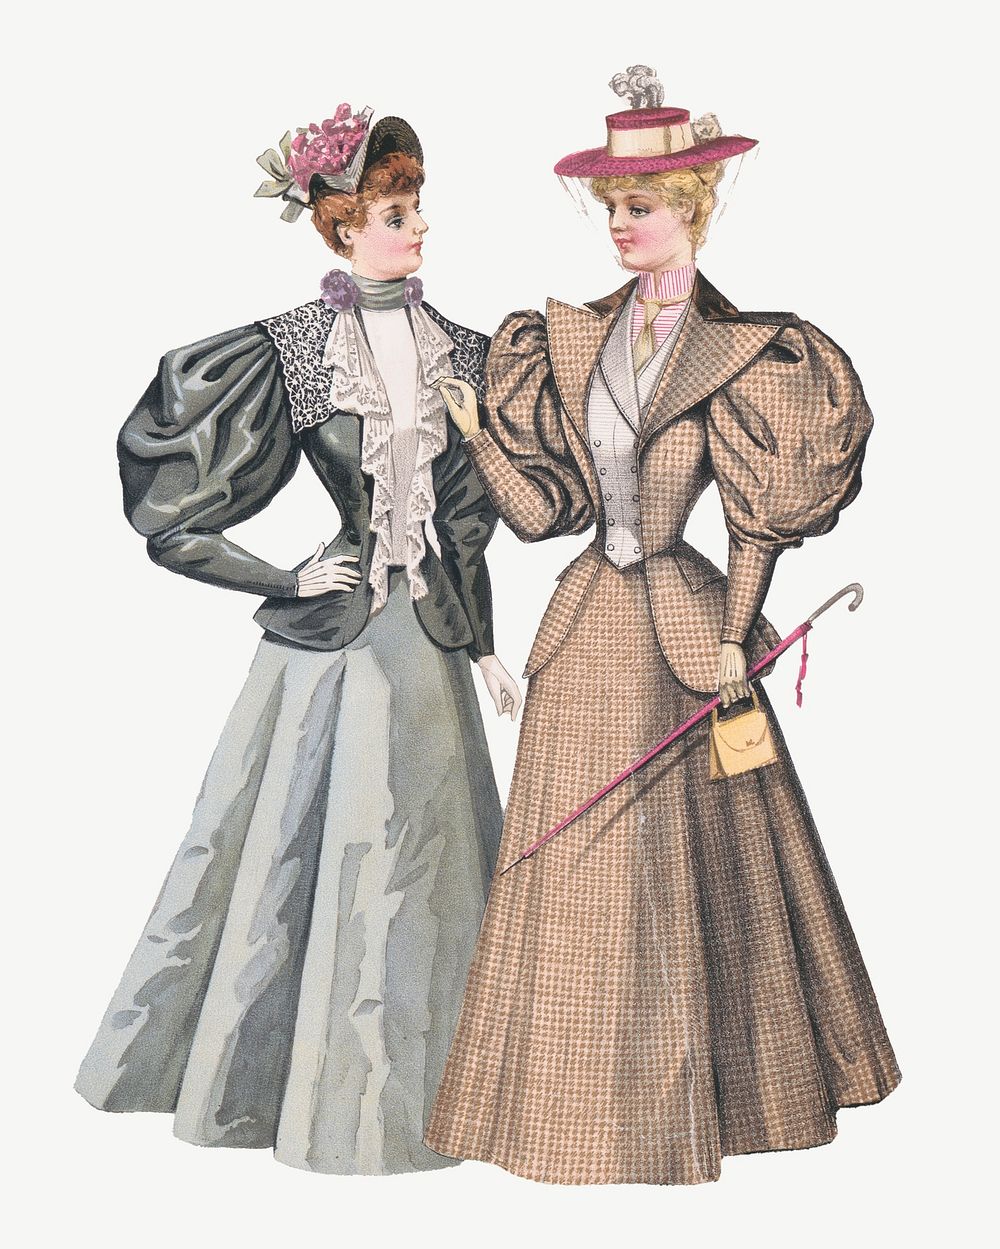 Victorian women, vintage fashion illustration psd. Remixed by rawpixel.